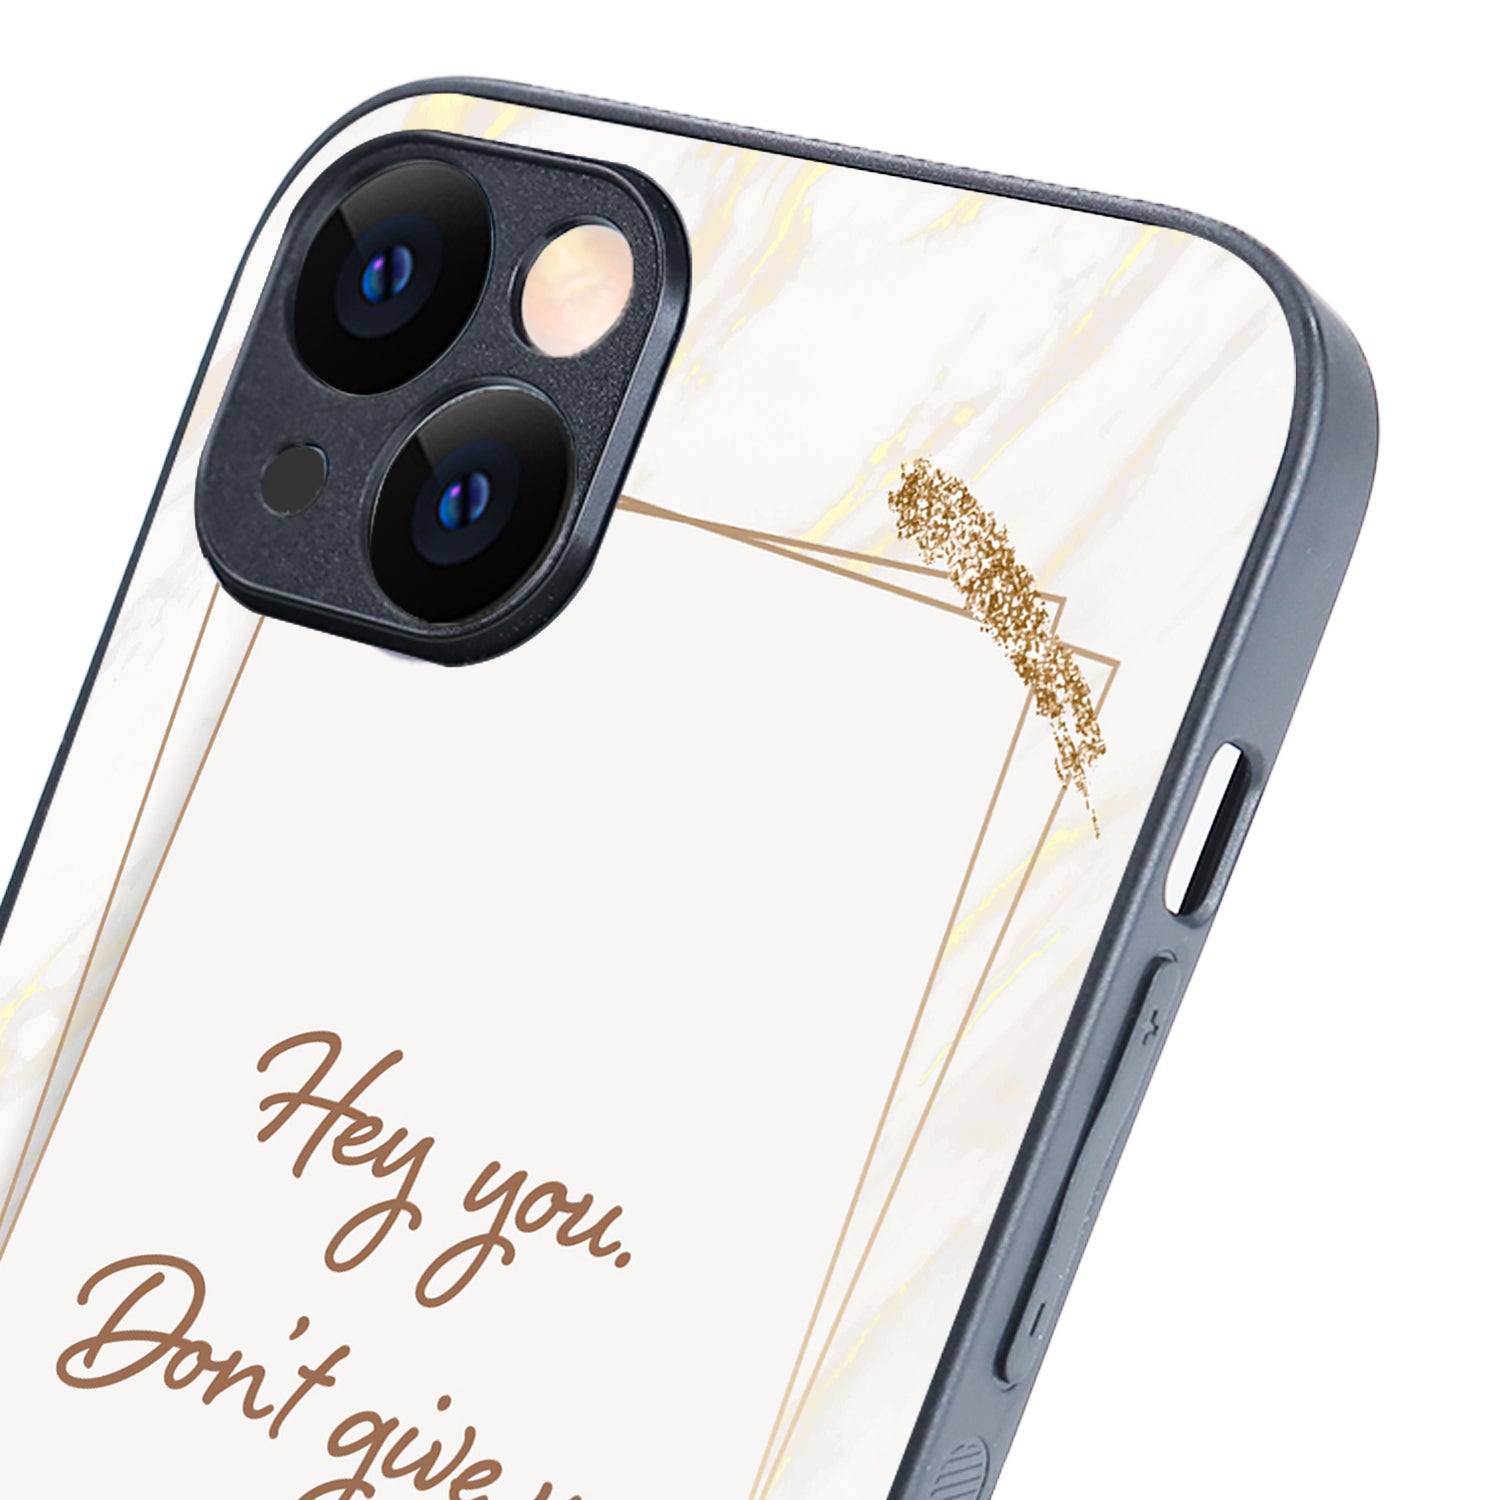 Hey You Motivational Quotes iPhone 14 Plus Case